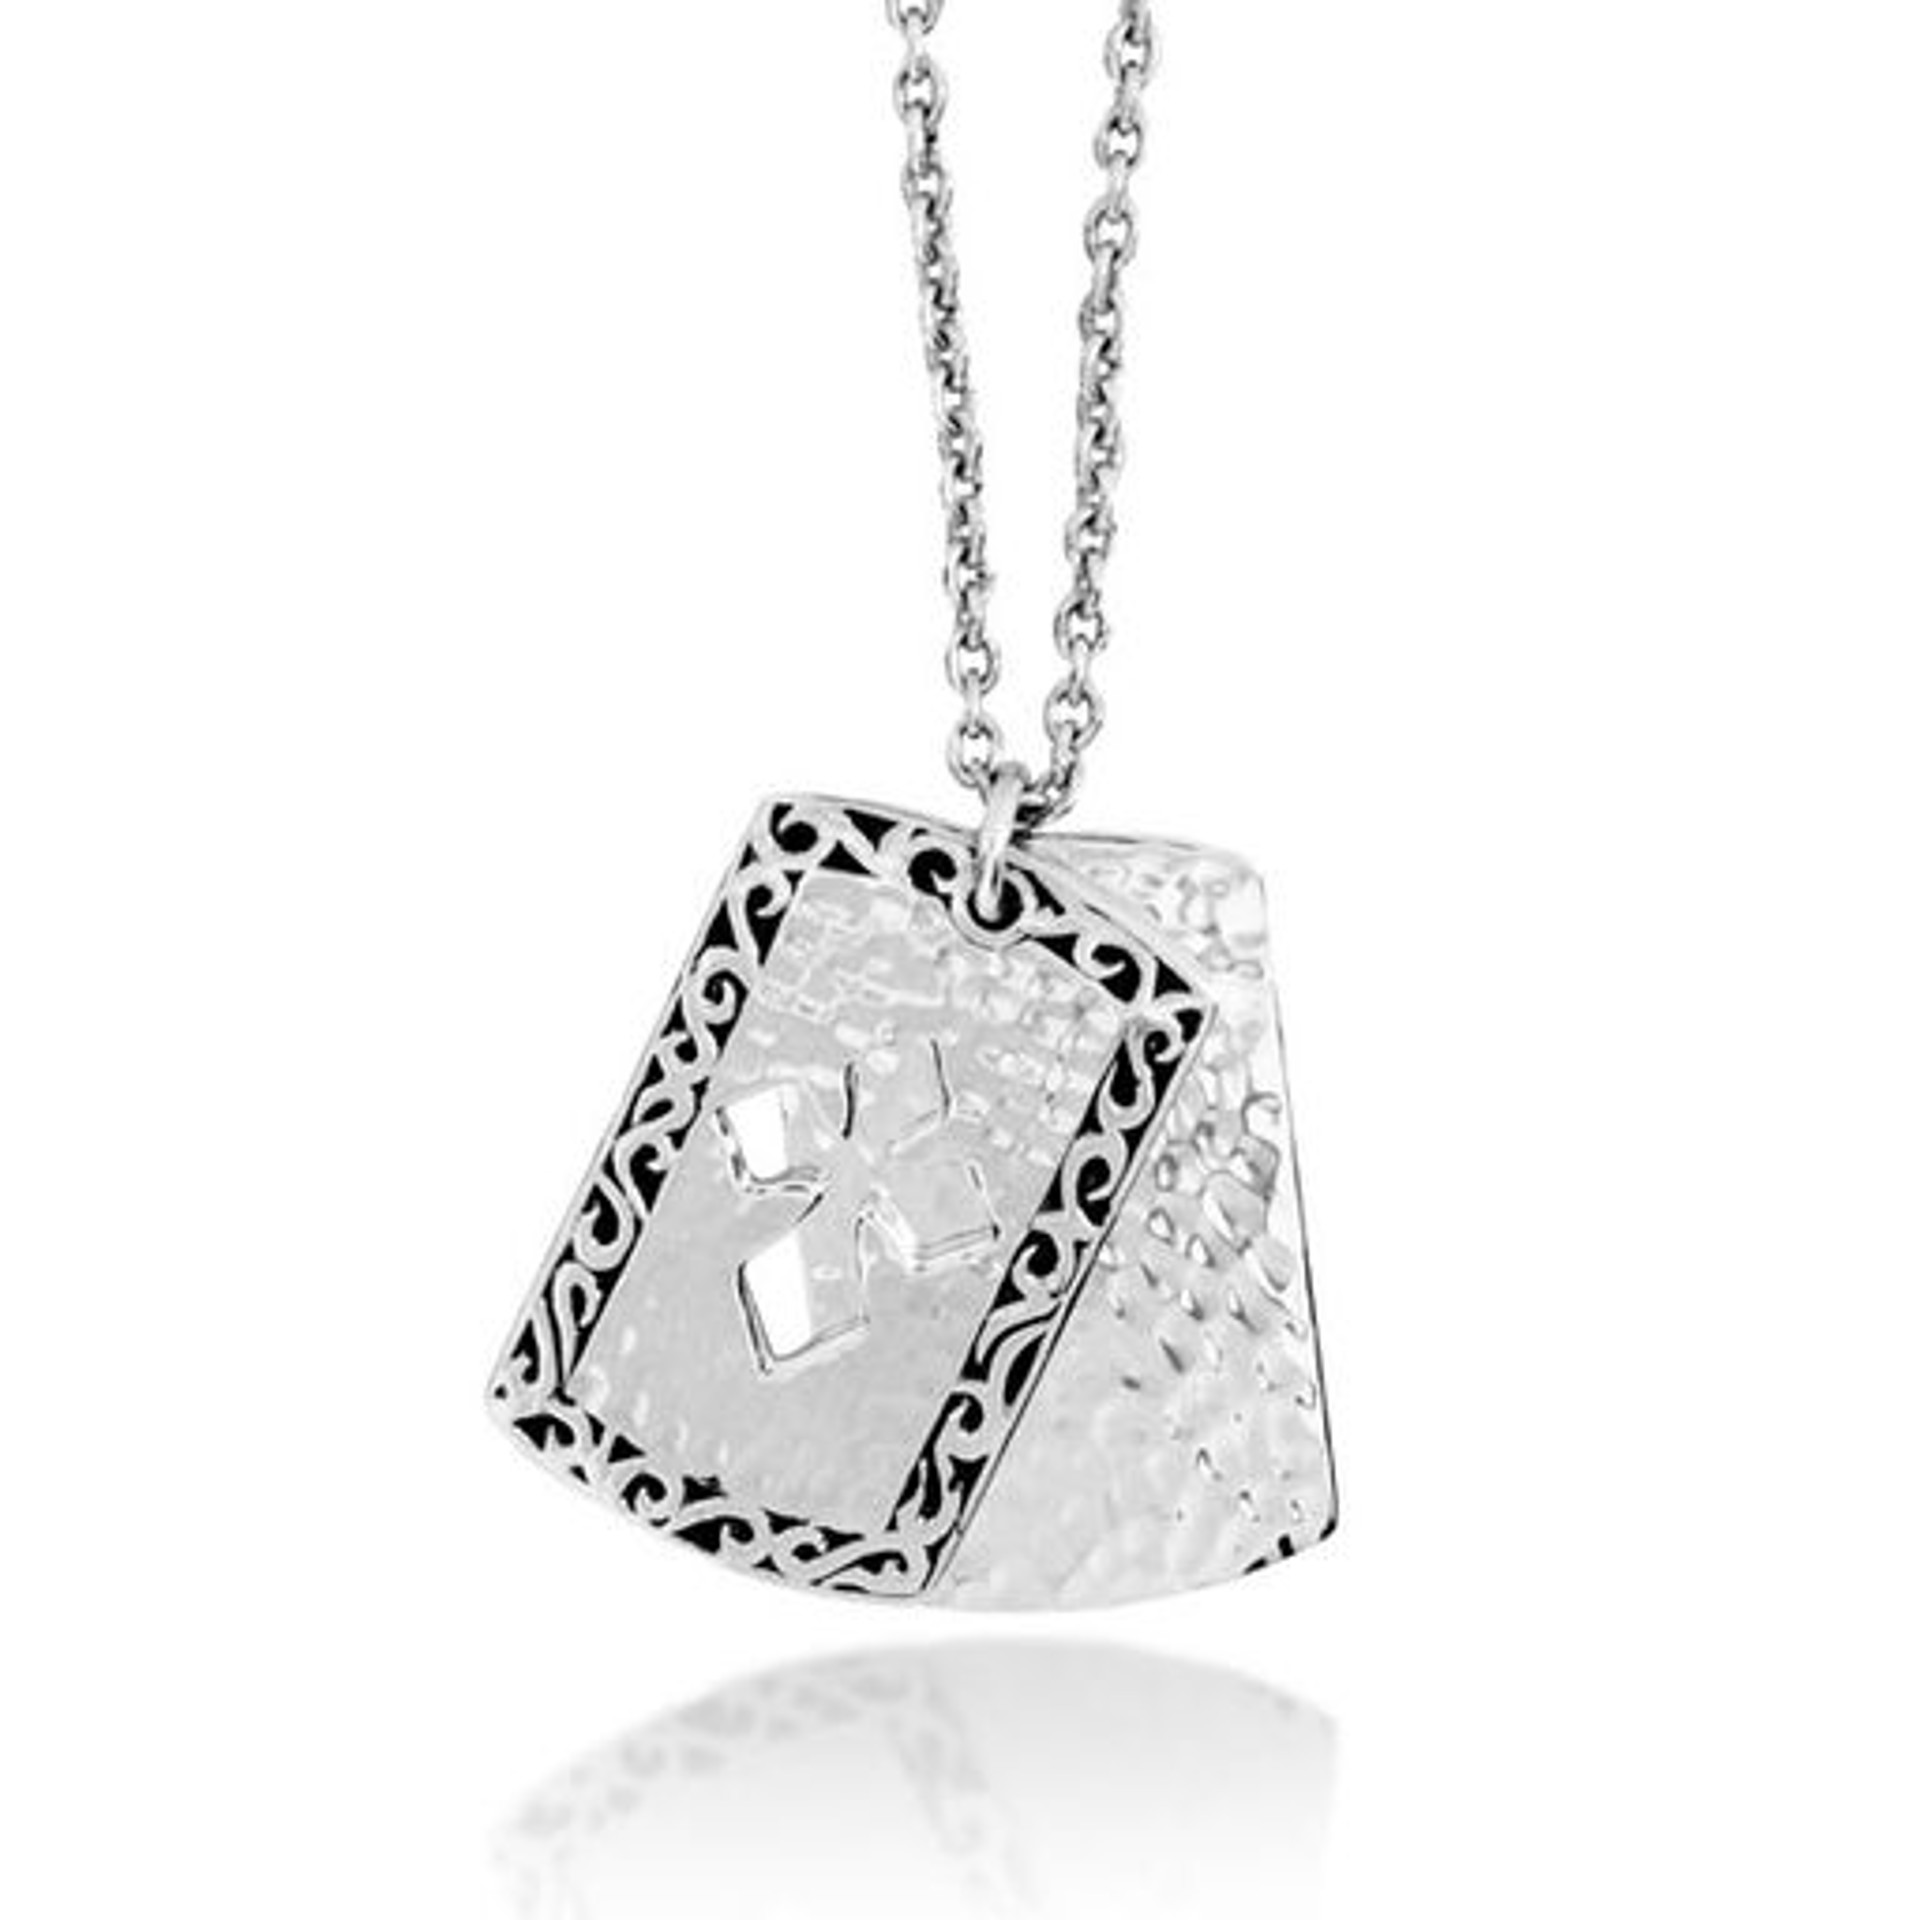 6986 Men's Sterling Silver Necklace by Lois Hill